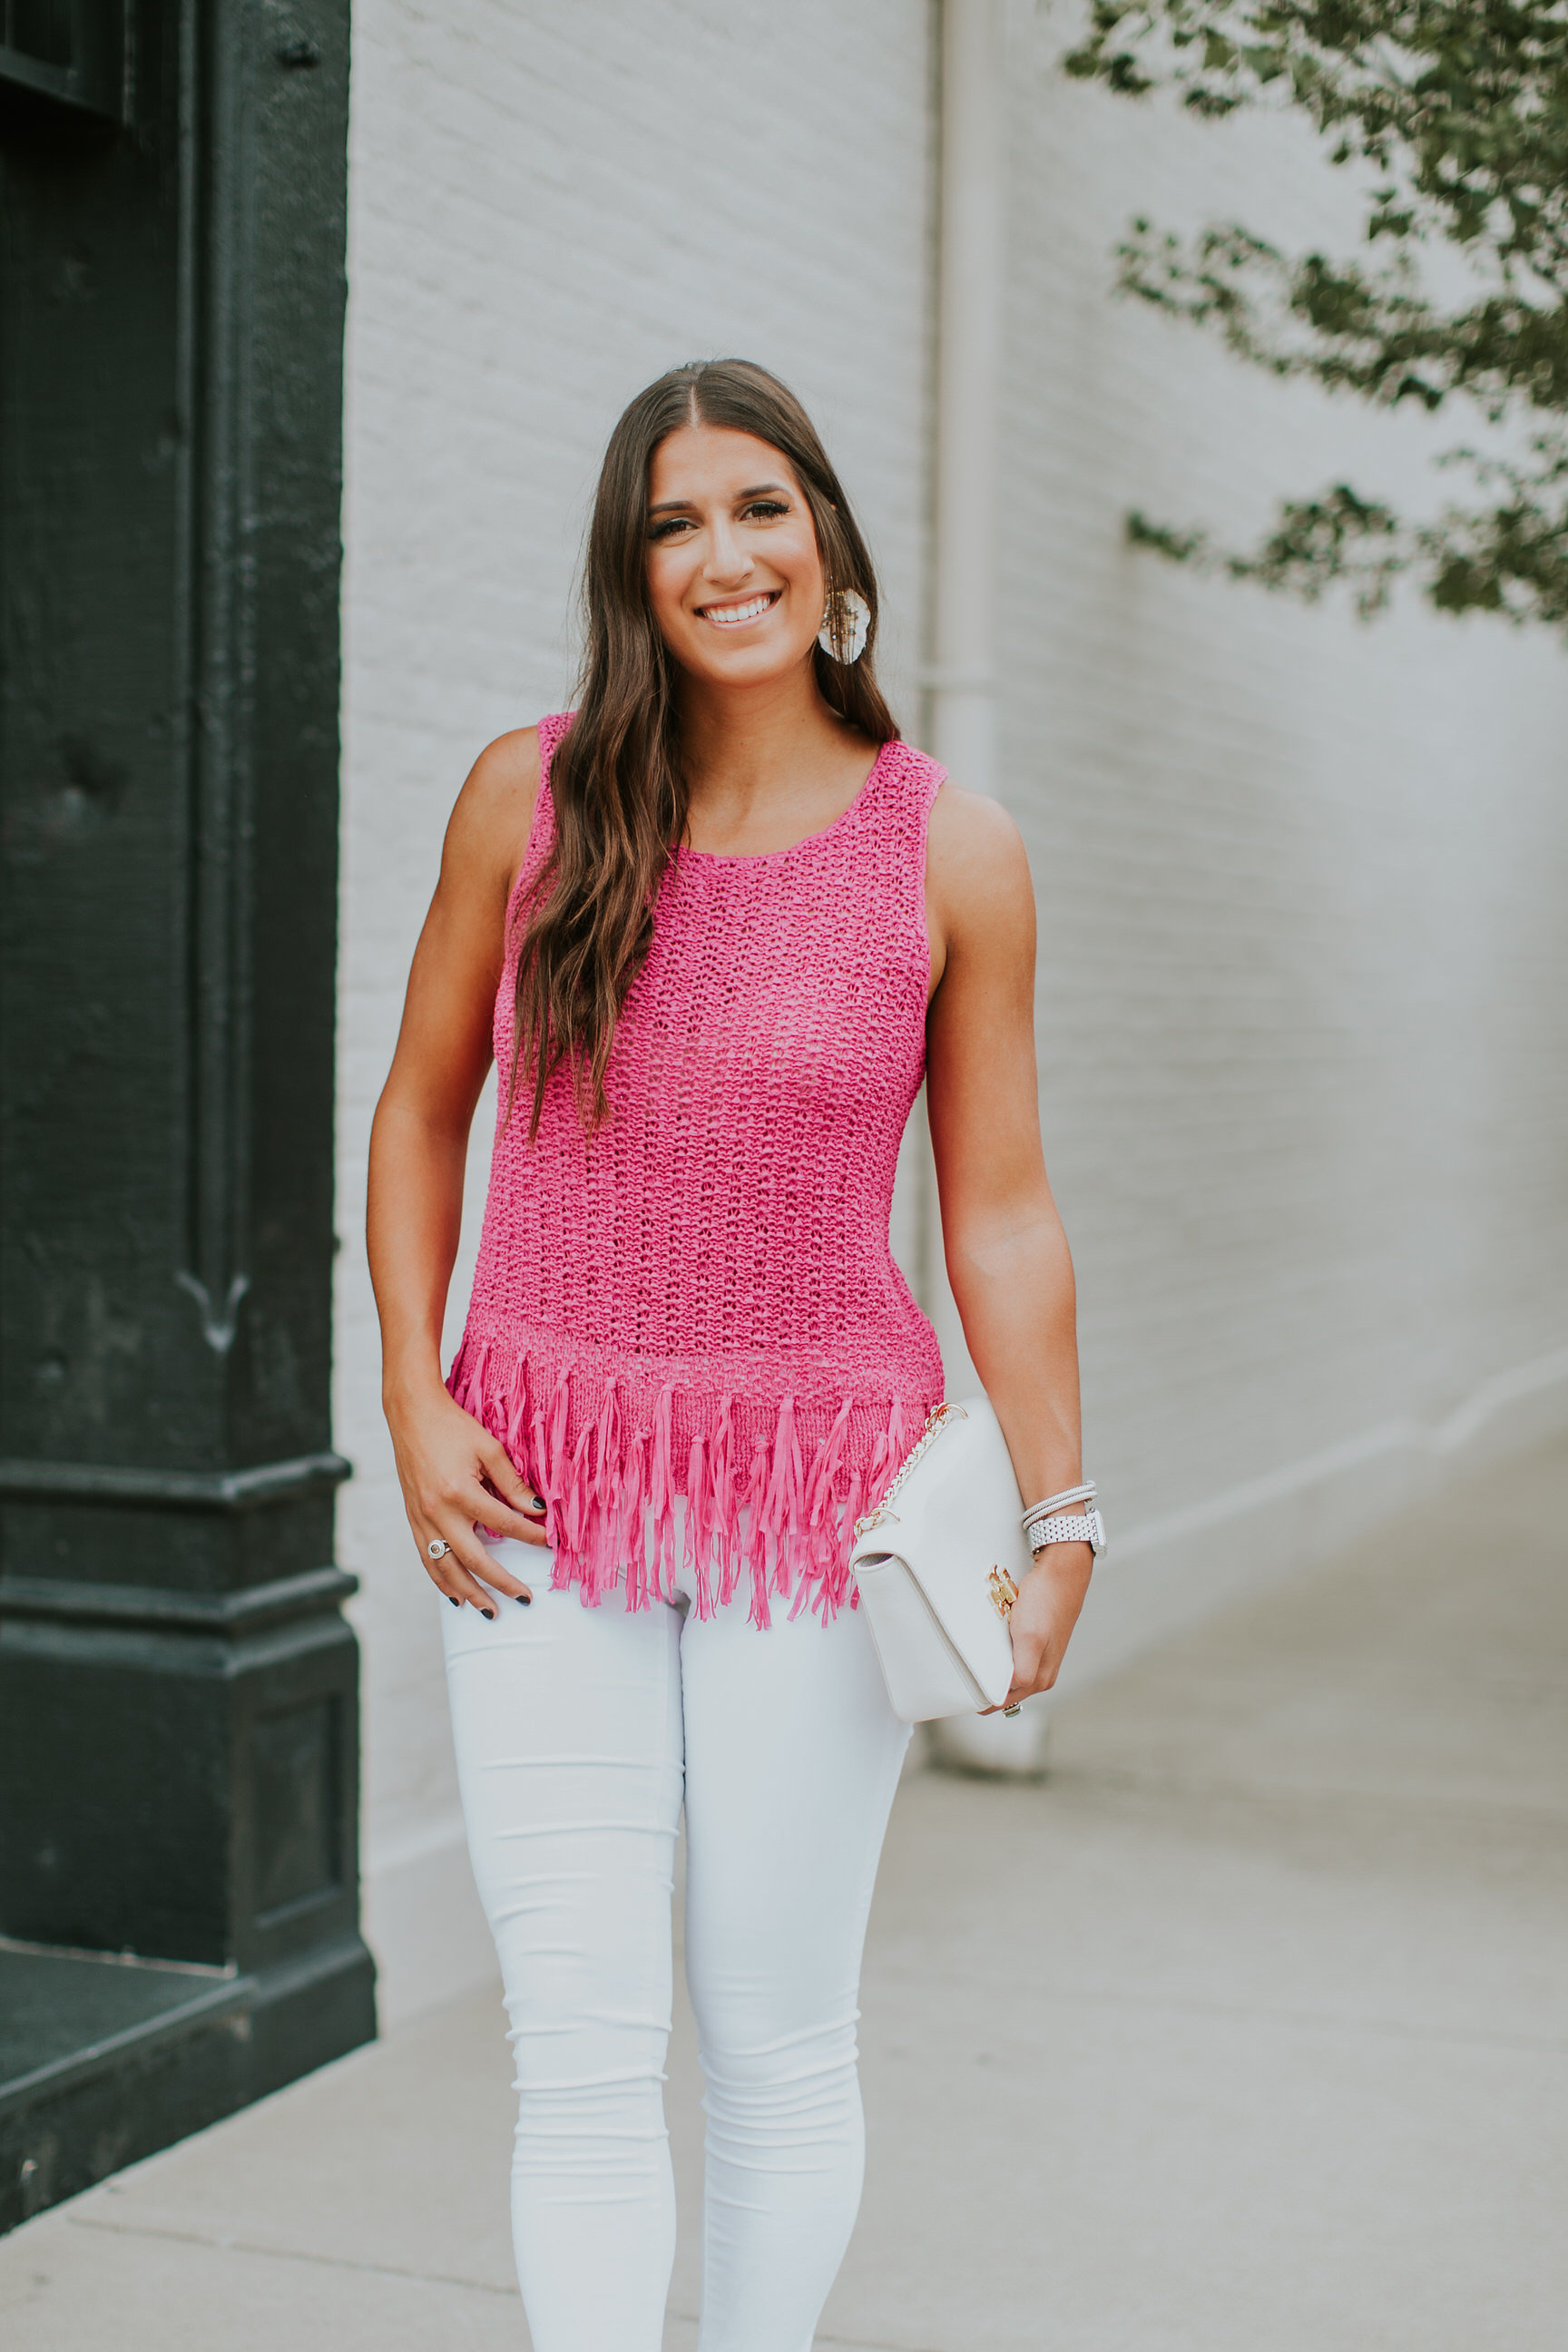 pink tassel top, lilly pulitzer tops, lilly pulitzer outfit, lilly pulitzer fashion, summer in lilly, resort365, buy me lilly, preppy fashion, fuchsia top, tassel top, baublebar statement earrings, tory burch crossbody bag, preppy fashion, preppy outfit ideas // grace wainwright a southern drawl